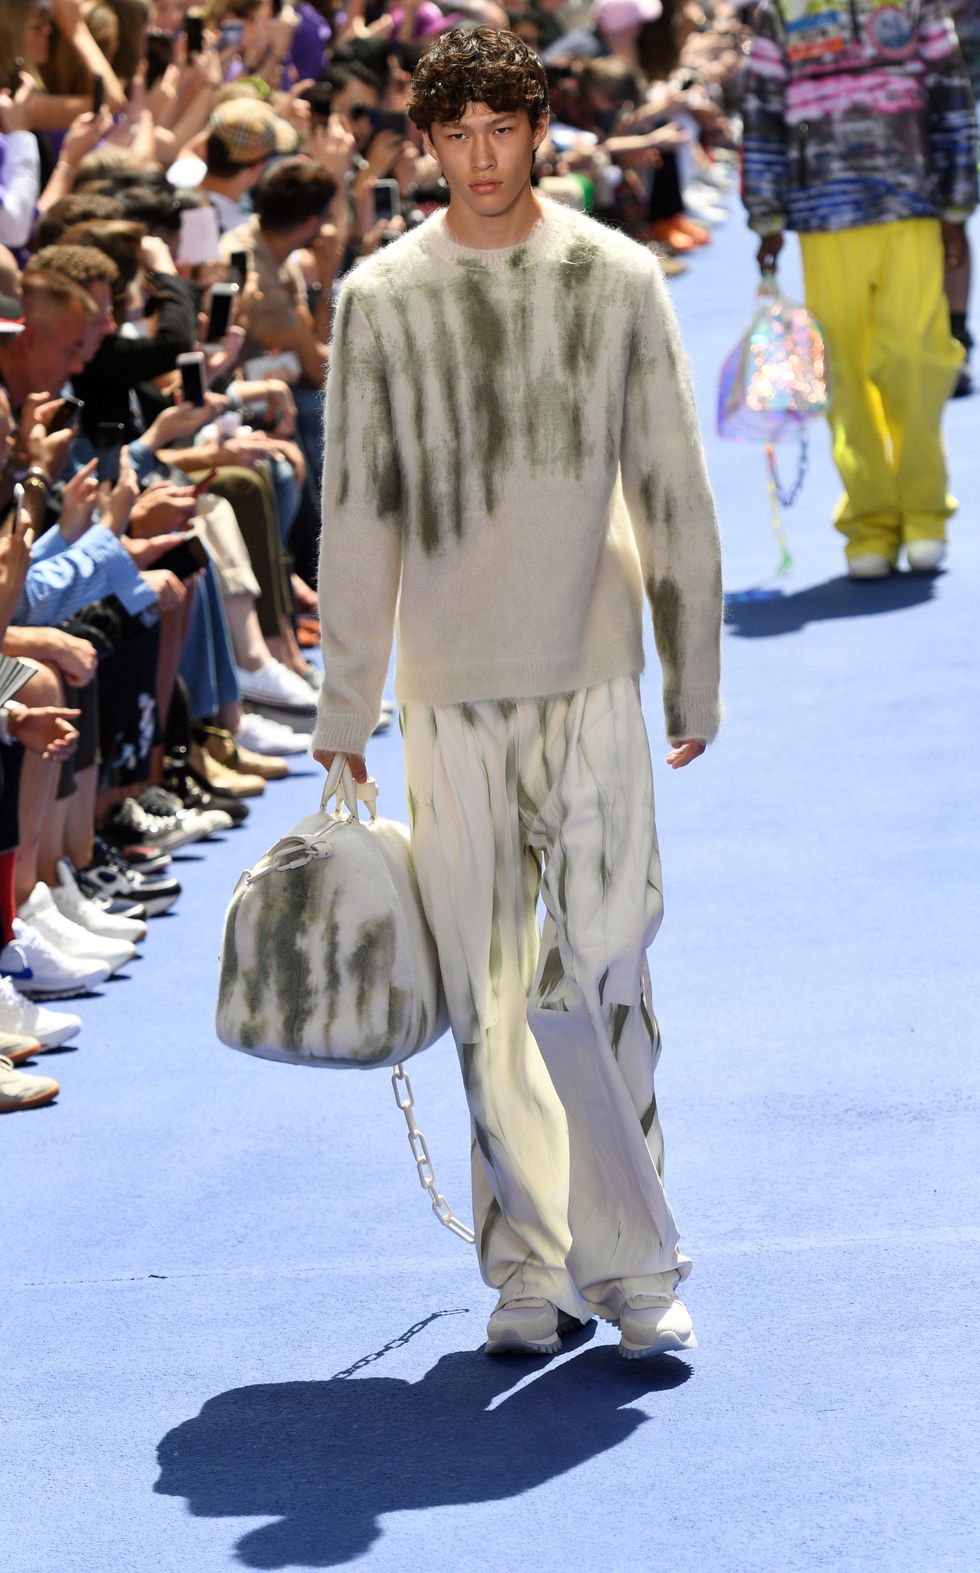 UPDATED: A First Look at Virgil Abloh's Debut Louis Vuitton